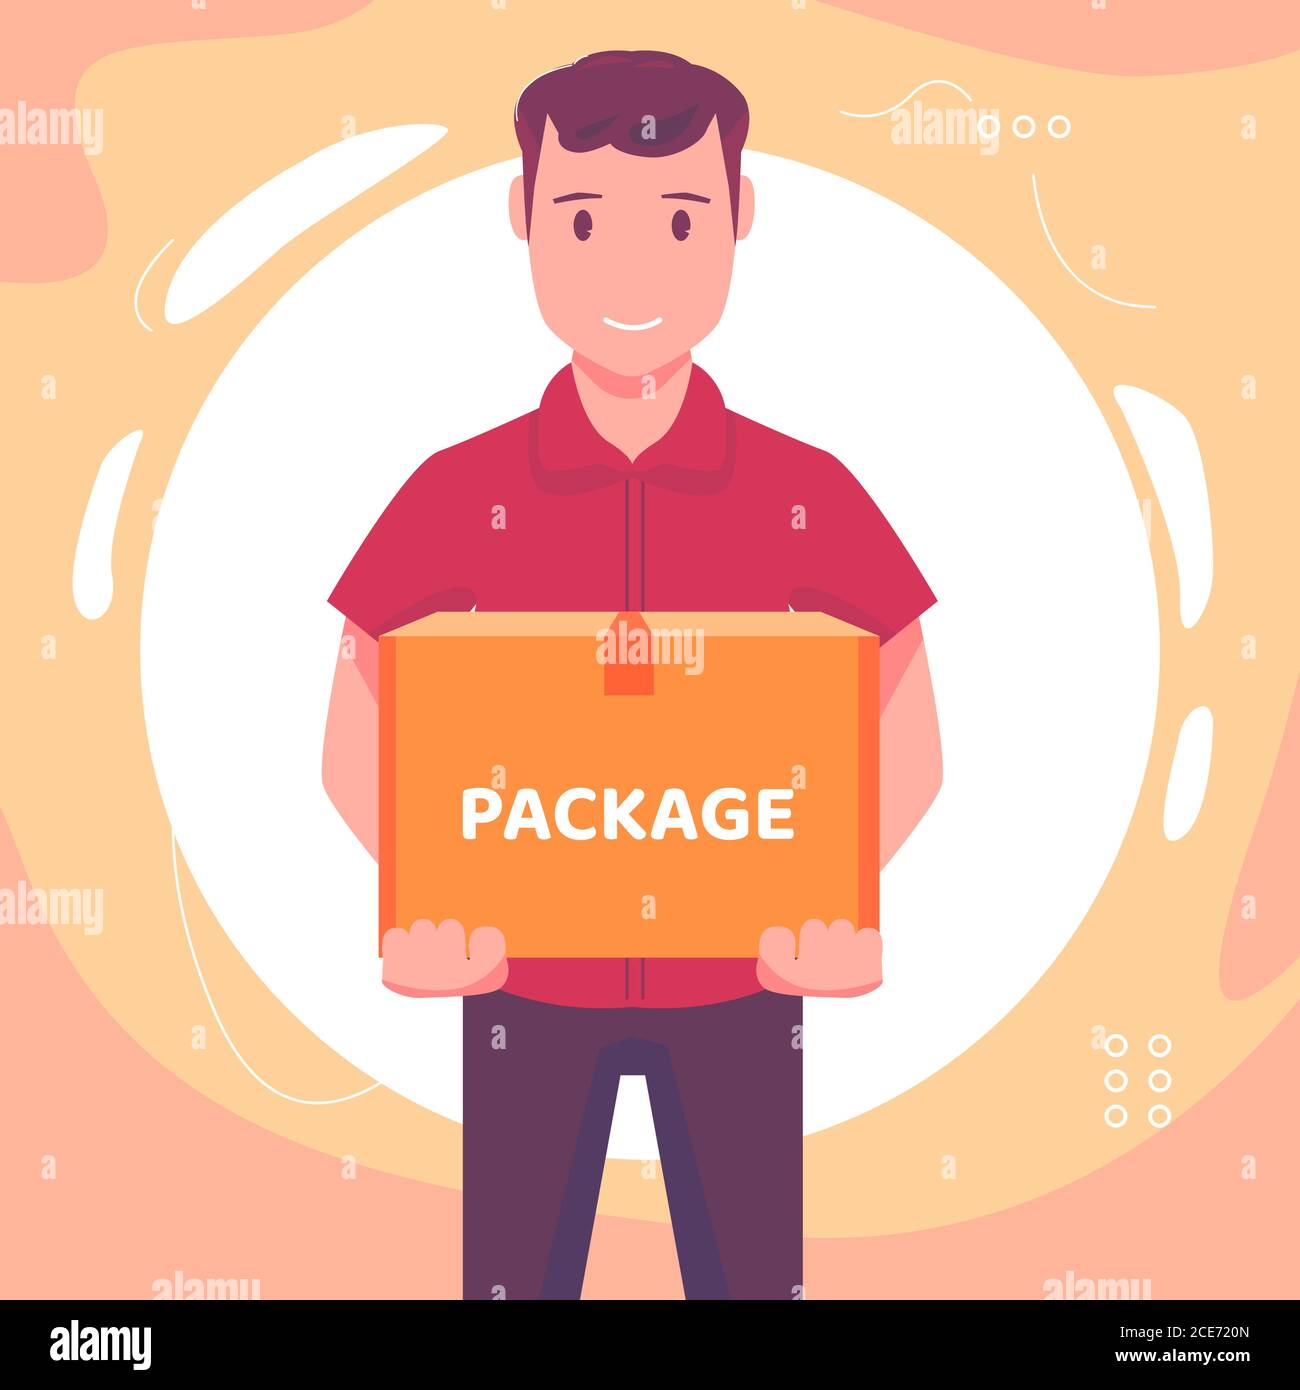 the package has arrived. the courier bring the package. flat design illustration Stock Vector